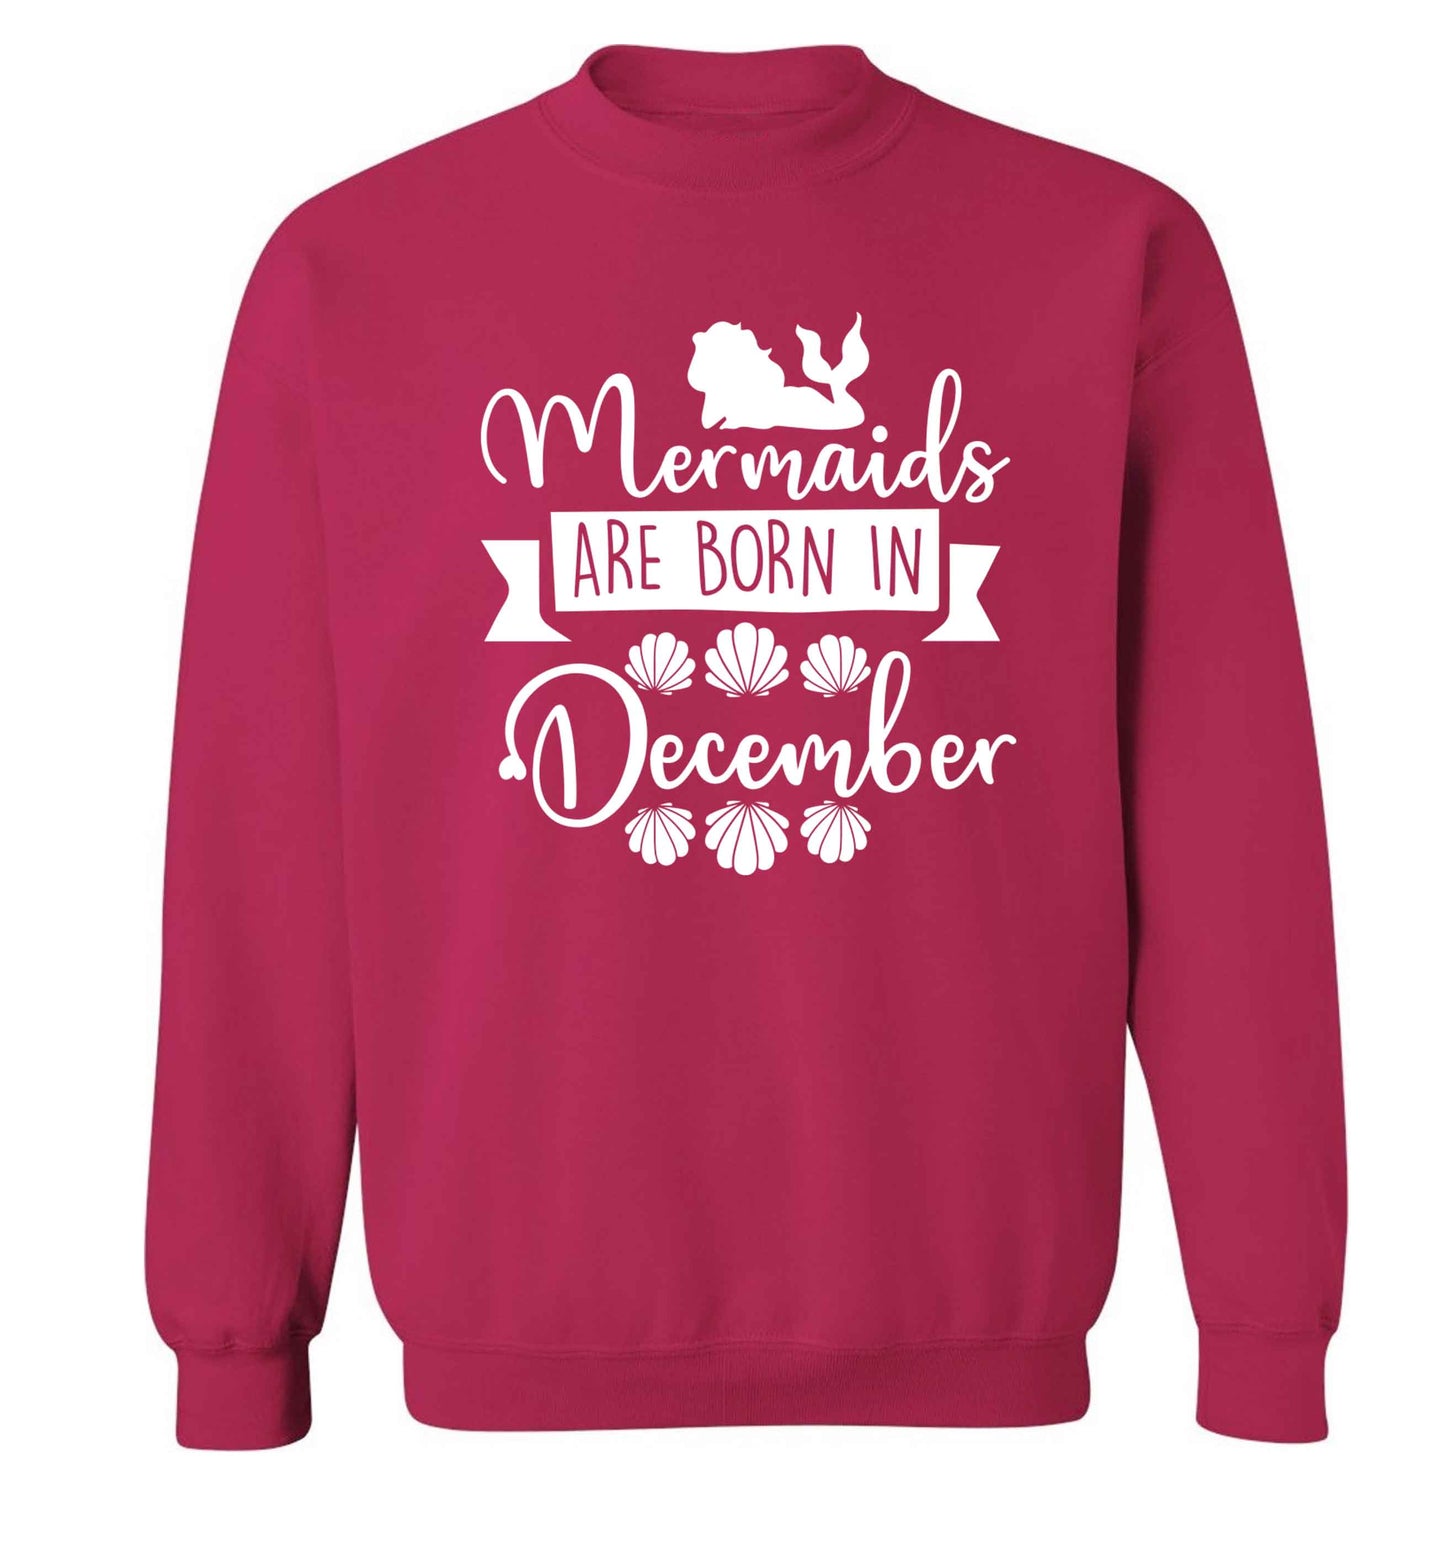 Mermaids are born in December Adult's unisex pink Sweater 2XL